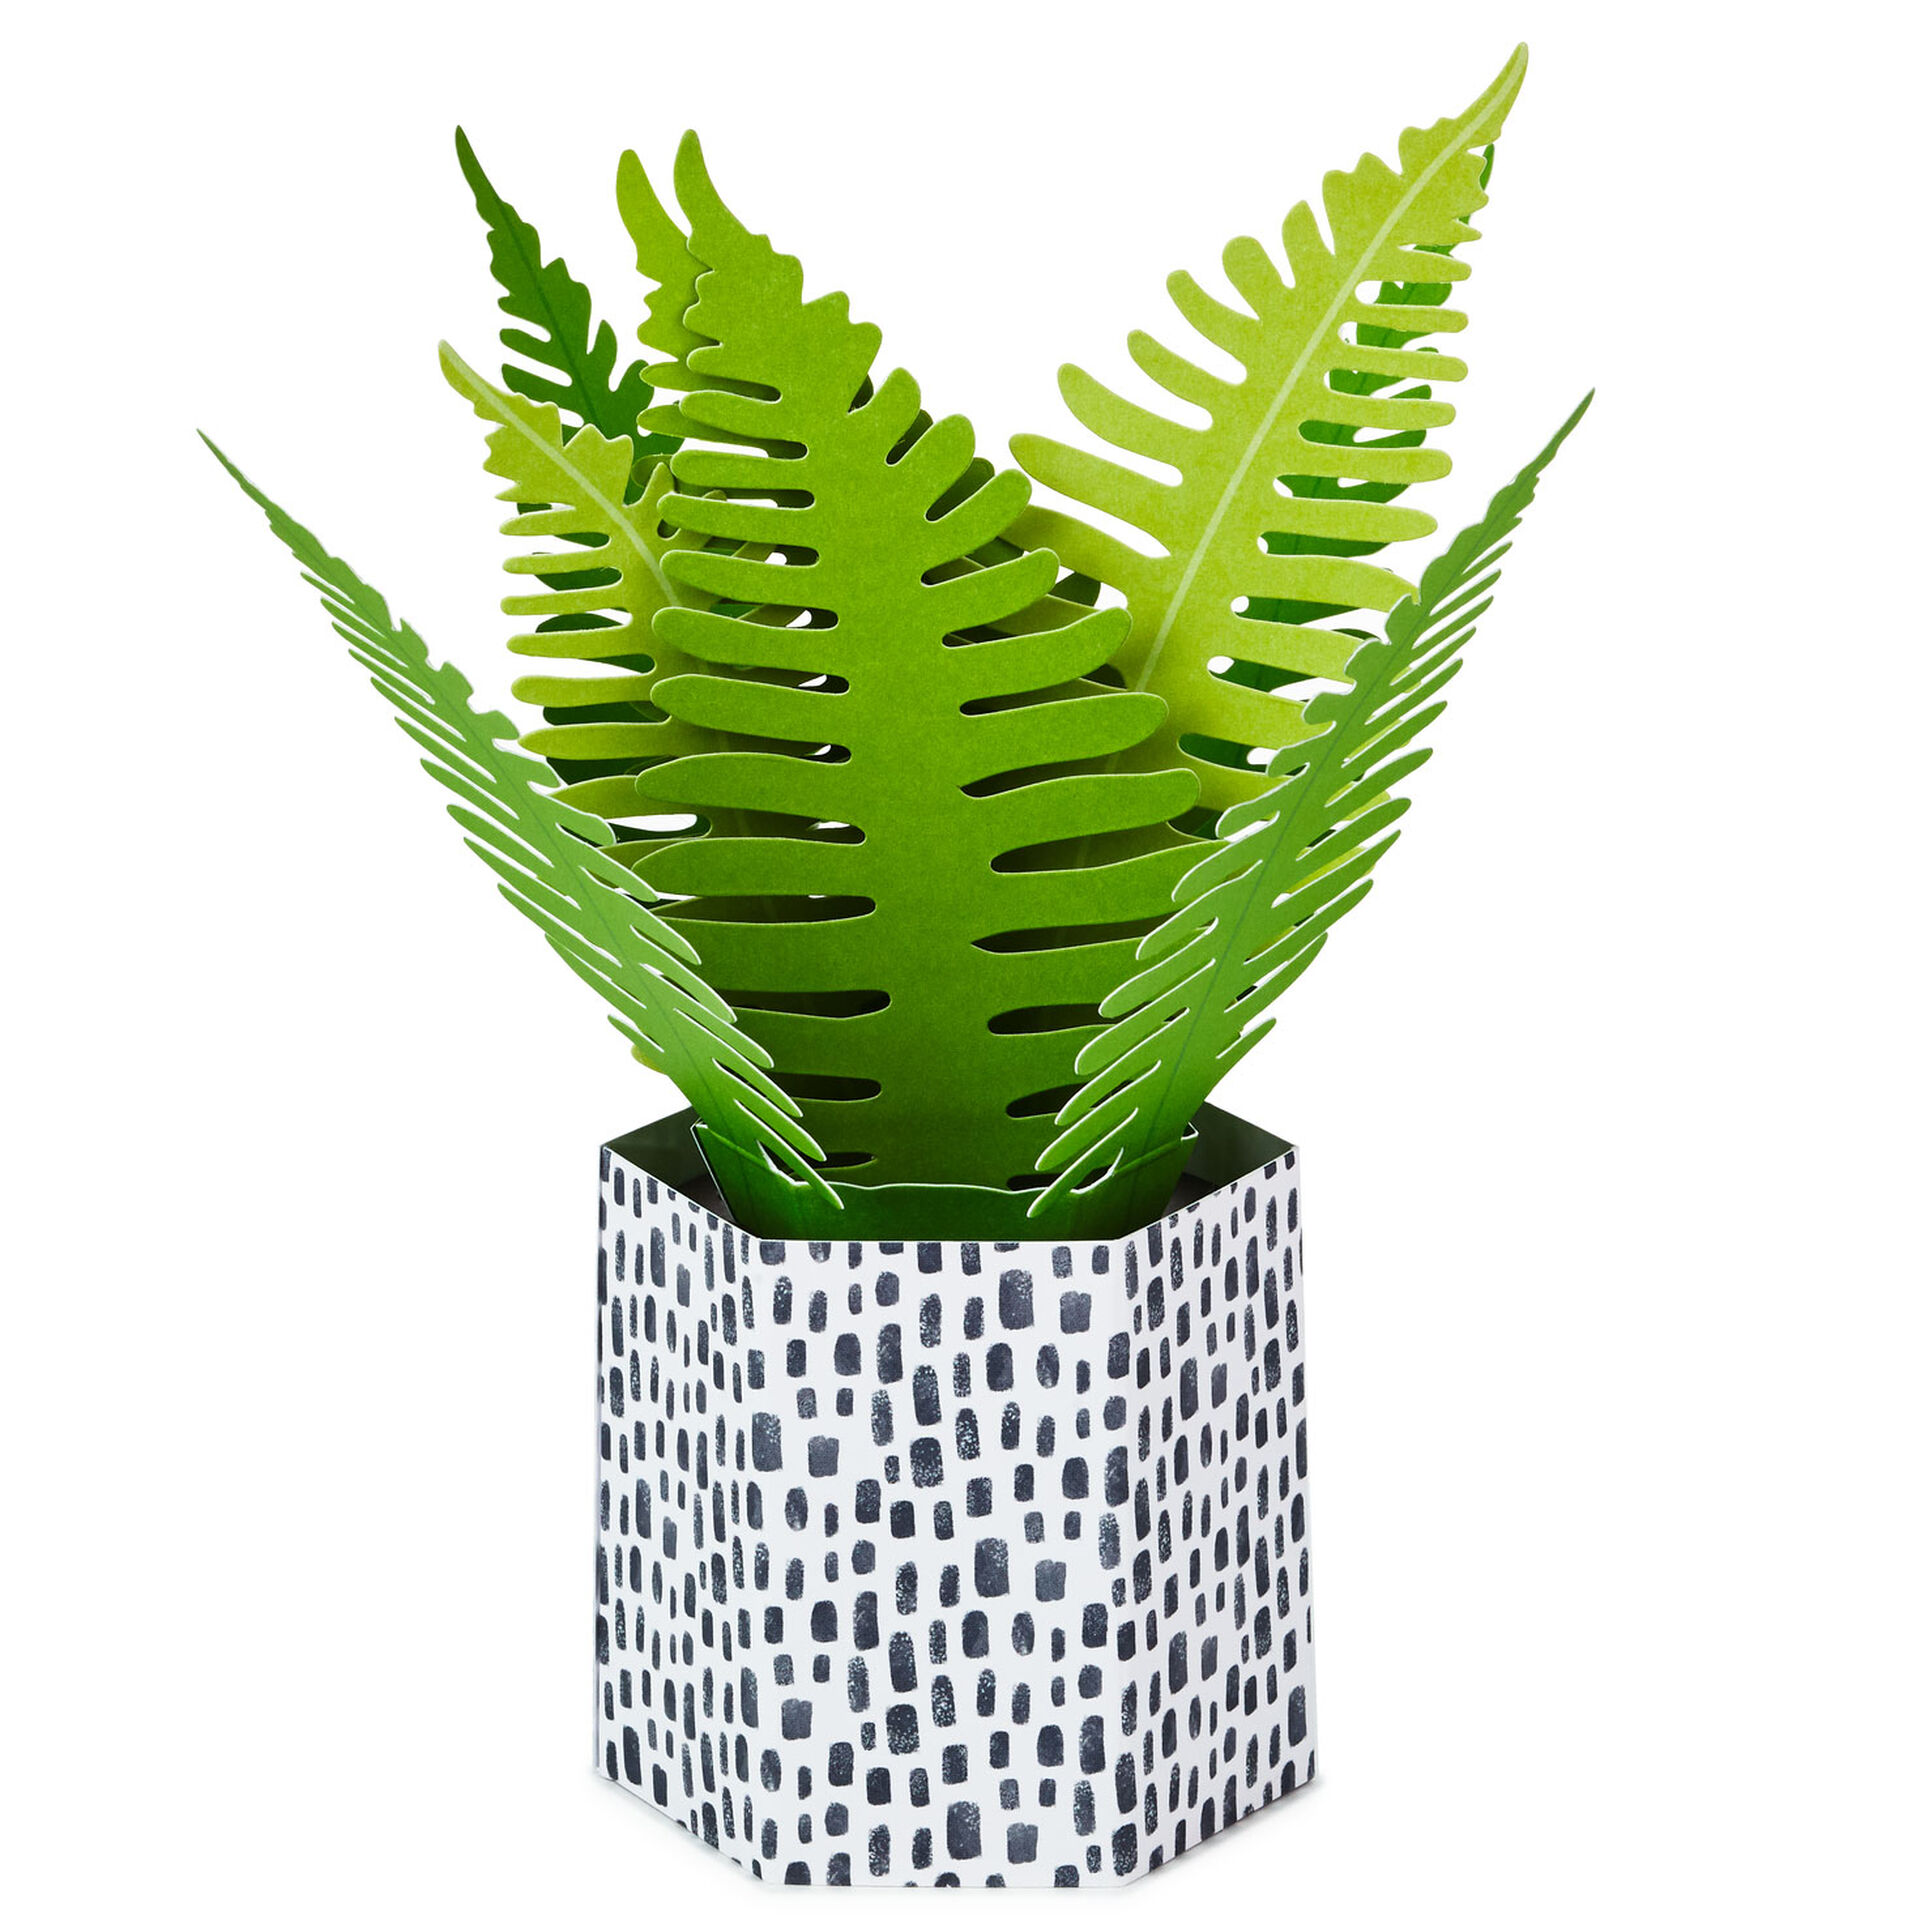 Fern-Pop-Plant-3D-PopUp-Thinking-of-You-Card_699WDR1199_02